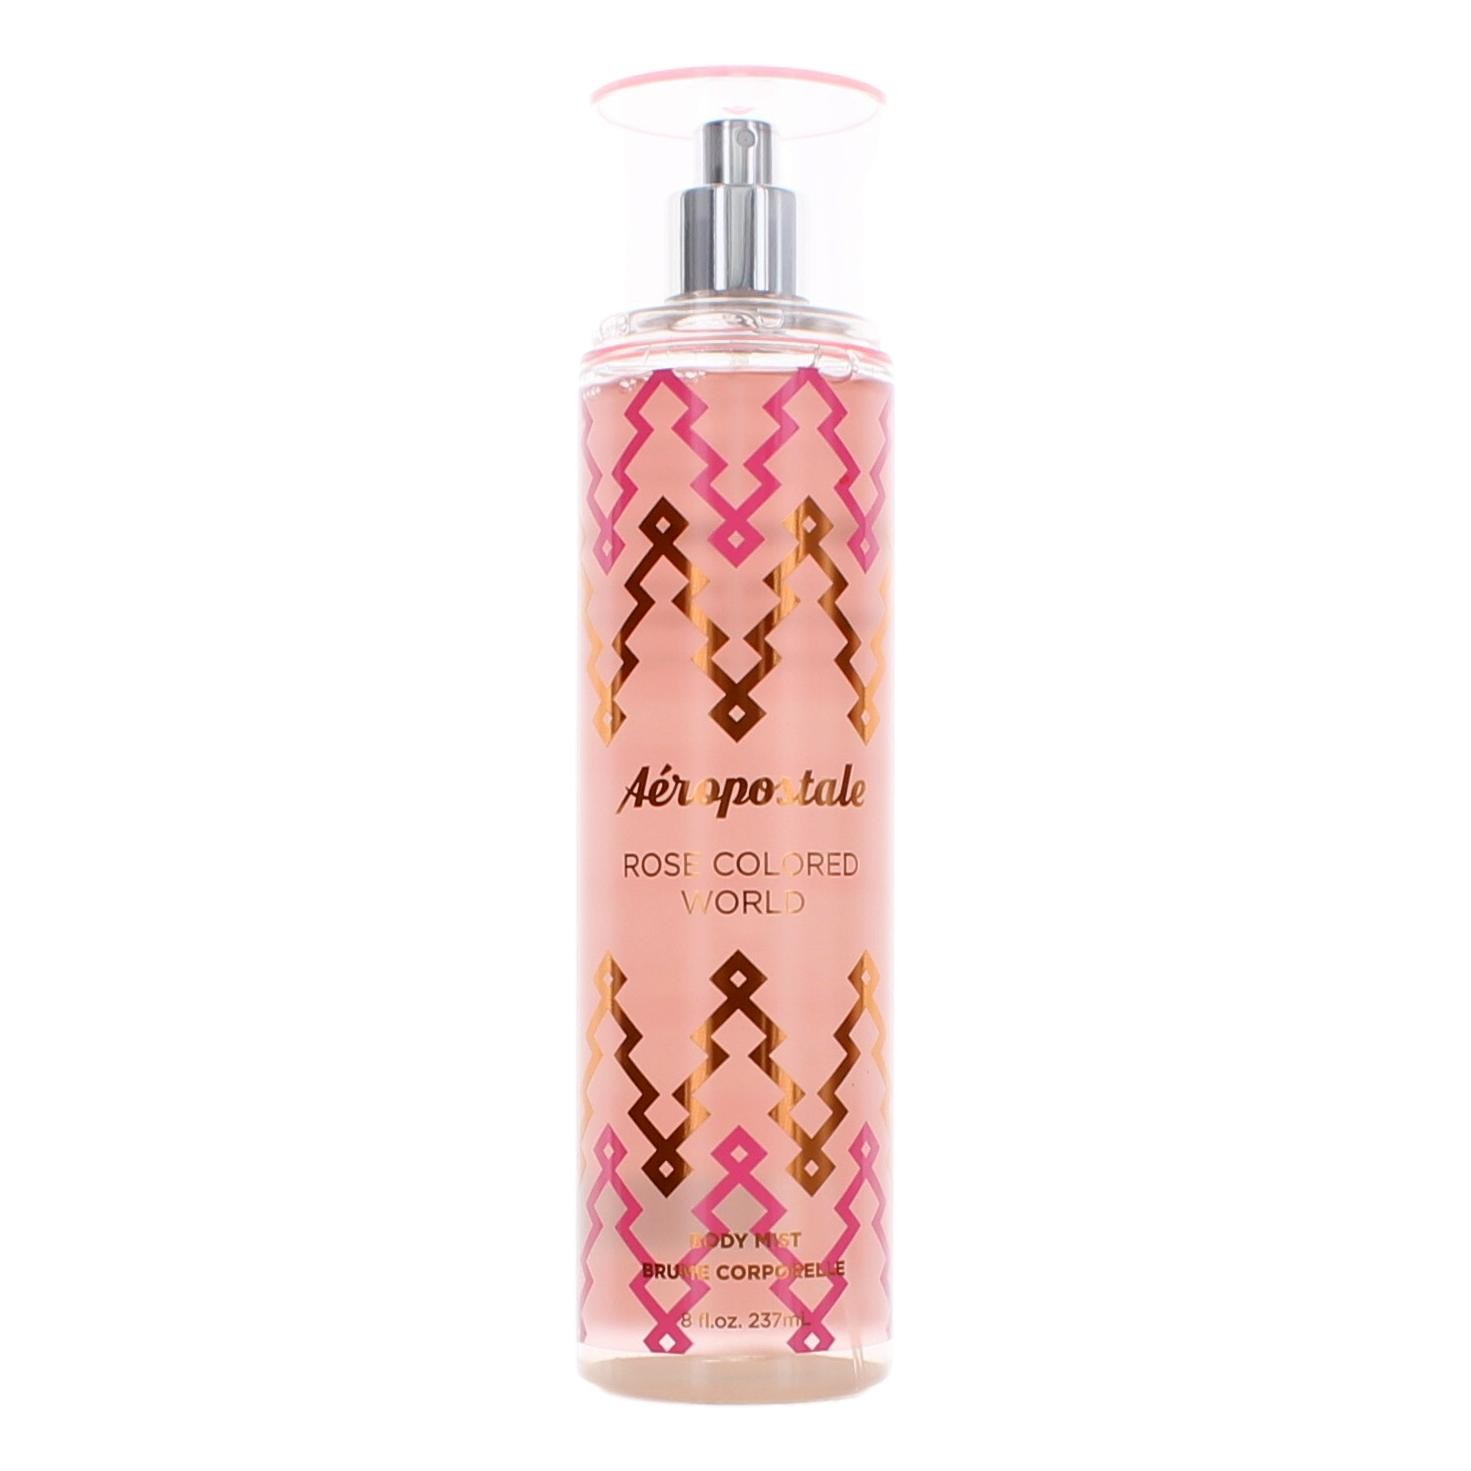 Rose Colored World by Aeropostale 8 oz Body Mist for Women